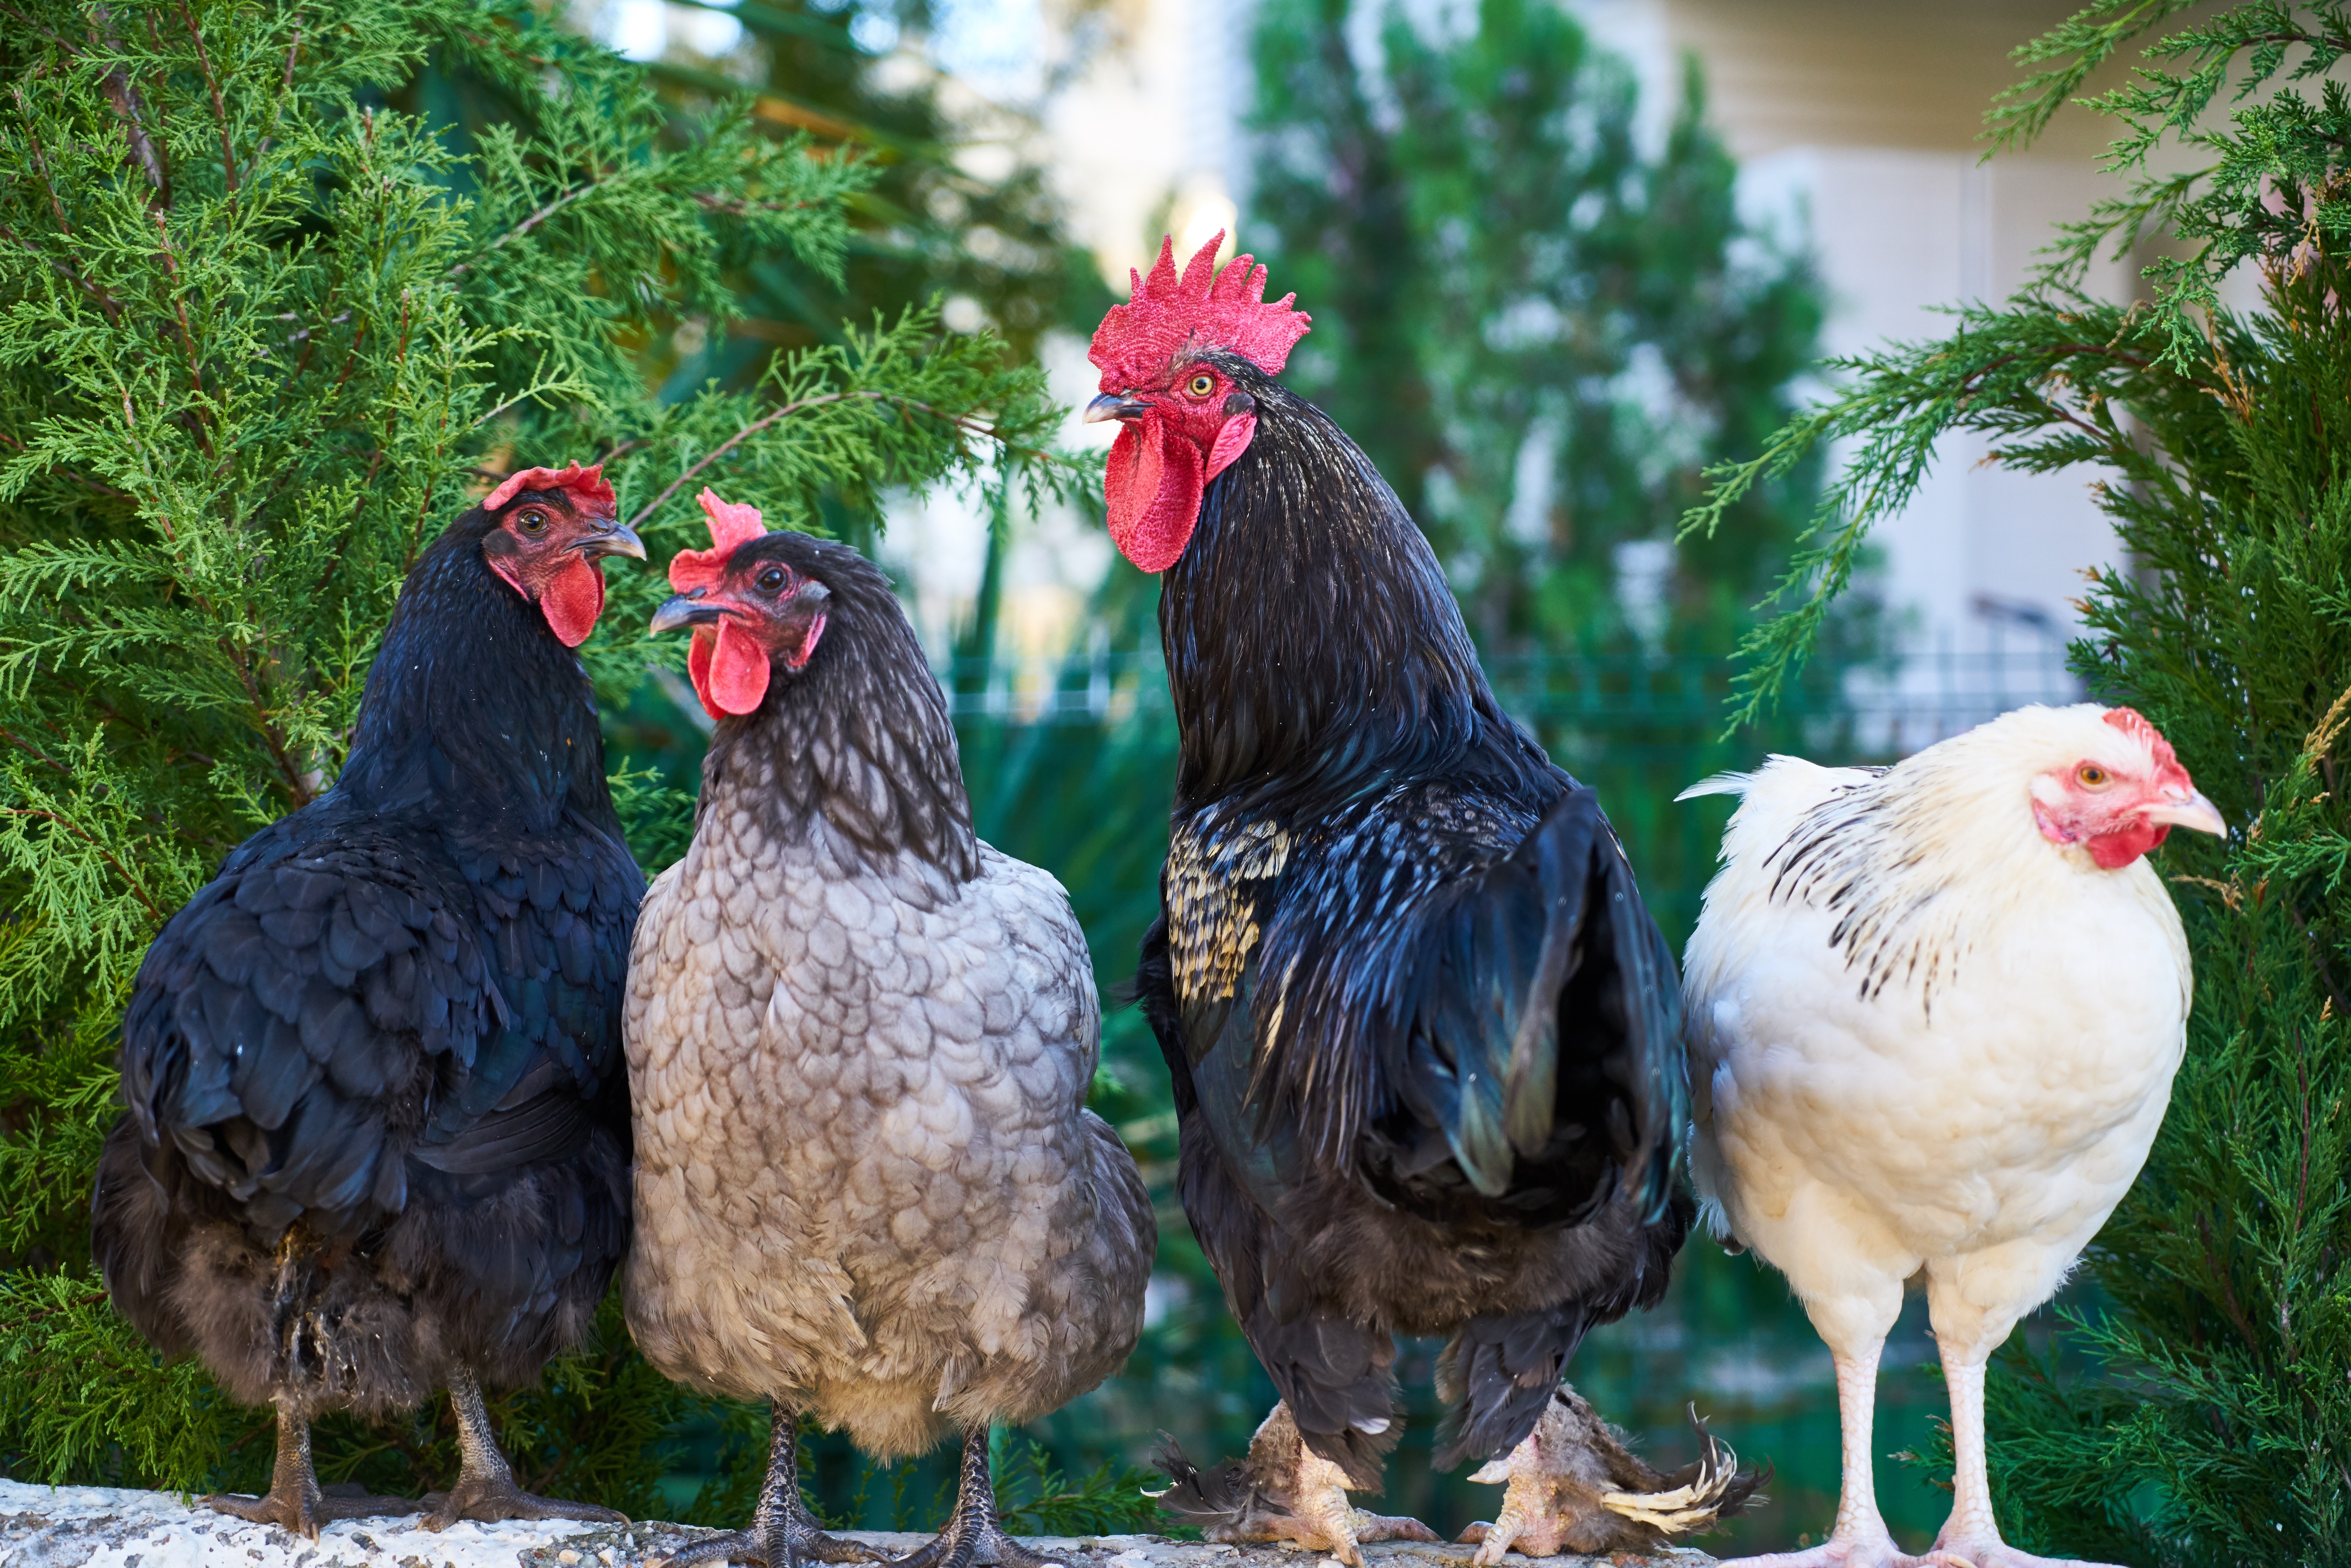 Four chickens representing the questionable ingredient at the heart of a defamation lawsuit